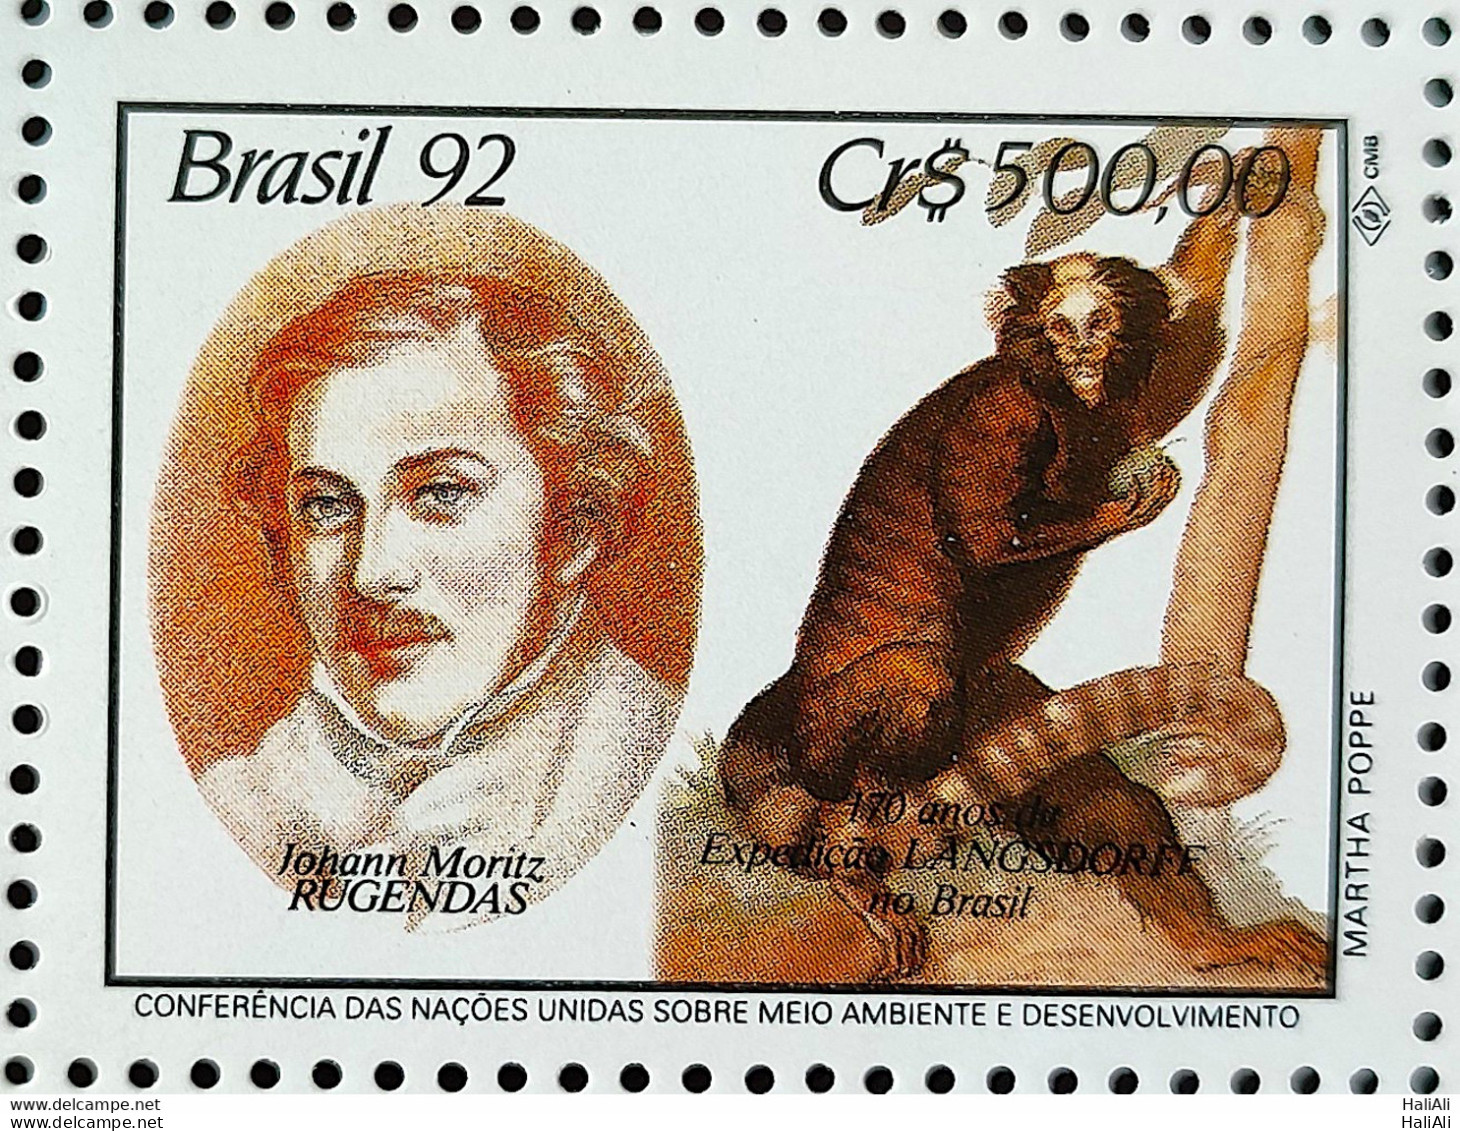 C 1794 Brazil Stamp Expedition Longsdorff Environment Florence Flora 1992 Complete Series - Unused Stamps